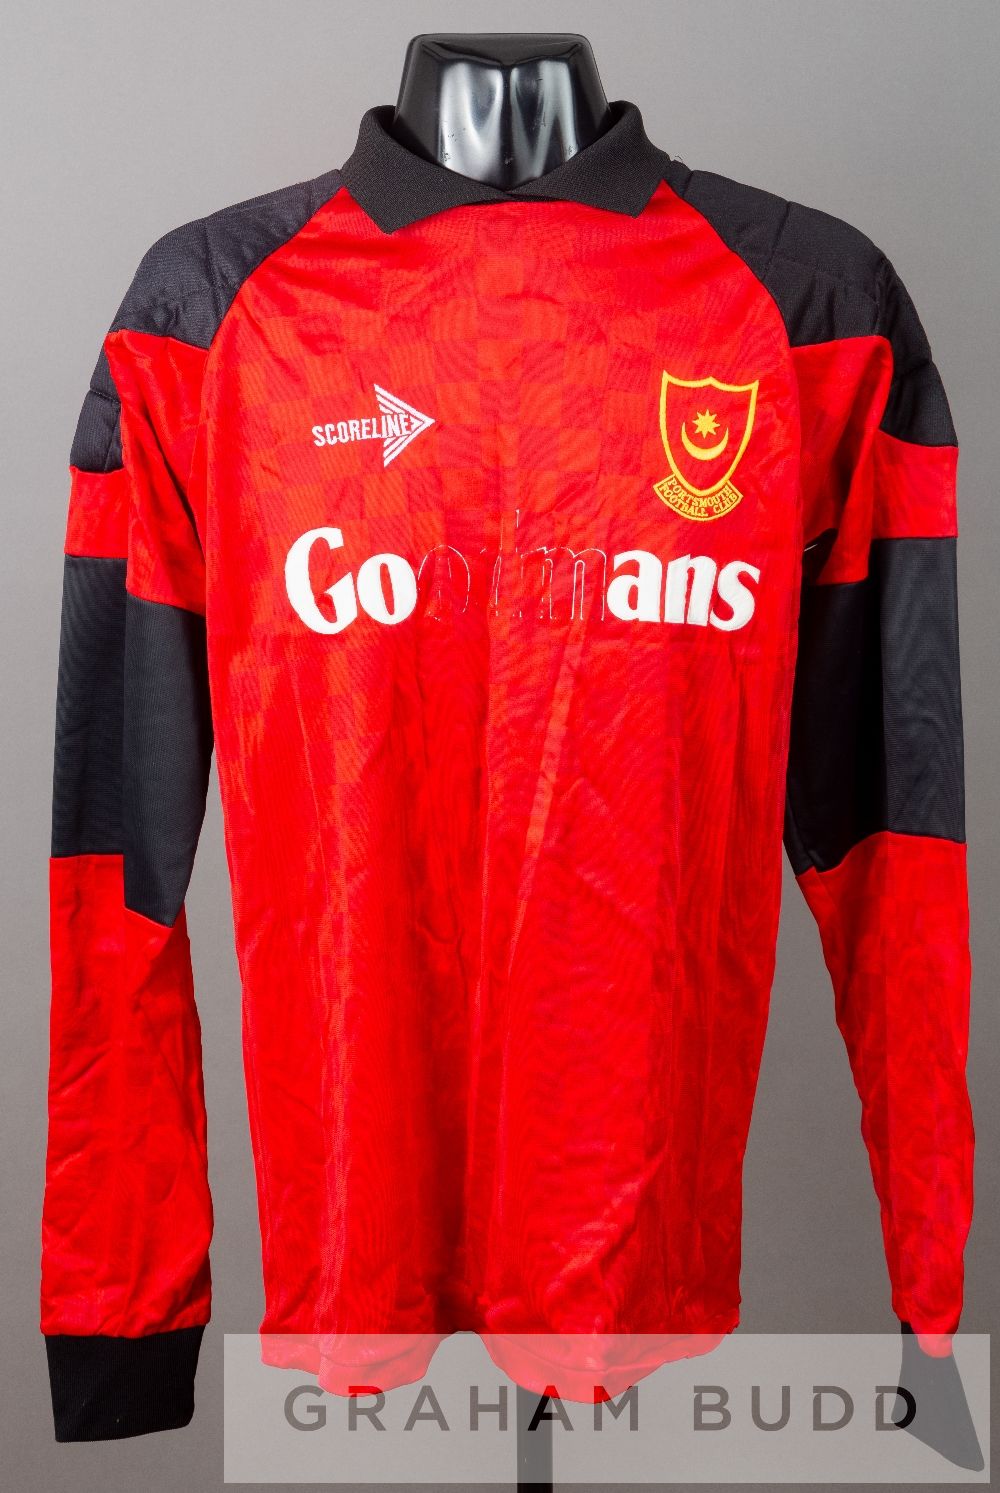 Alan Knight red and black Portsmouth no.1 goalkeeper's jersey, circa 1990, by Scoreline, long-